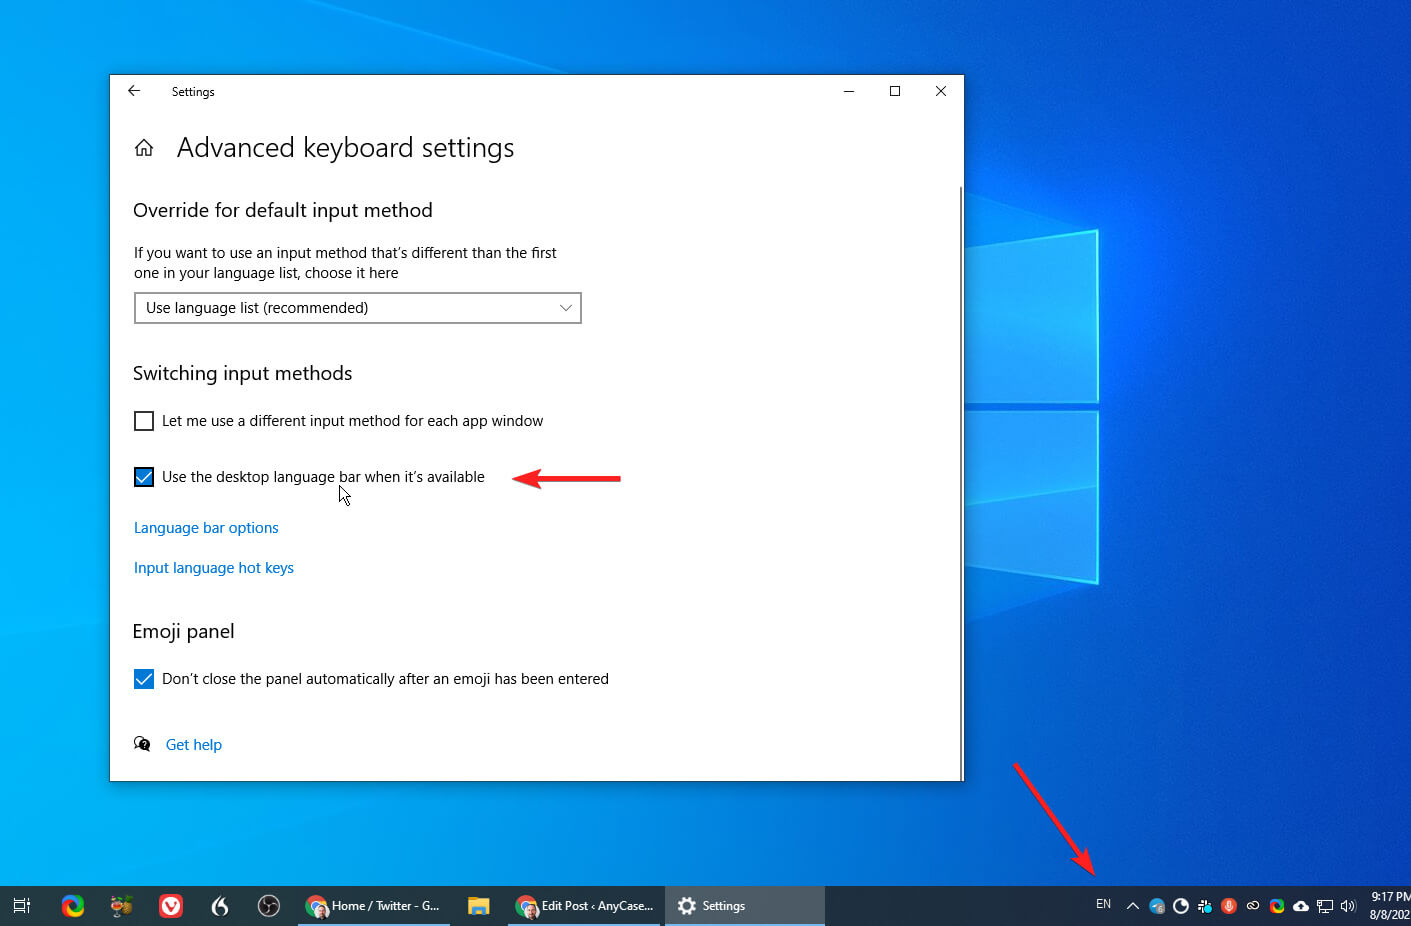 Use the desktop language bar when it's available setting